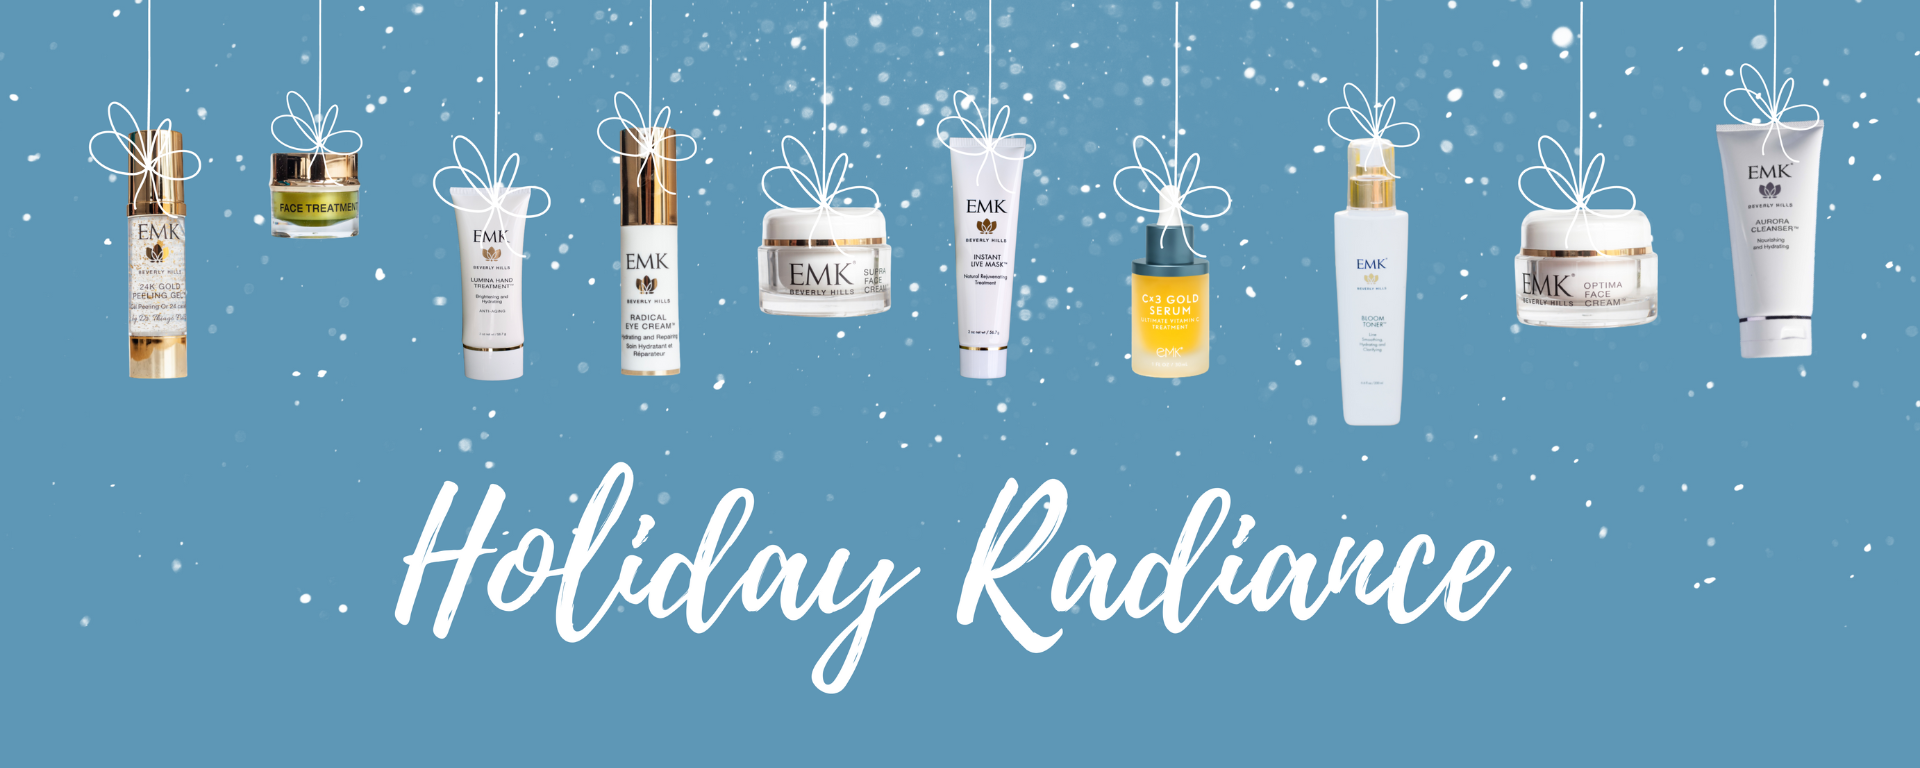 Products Holiday Banner